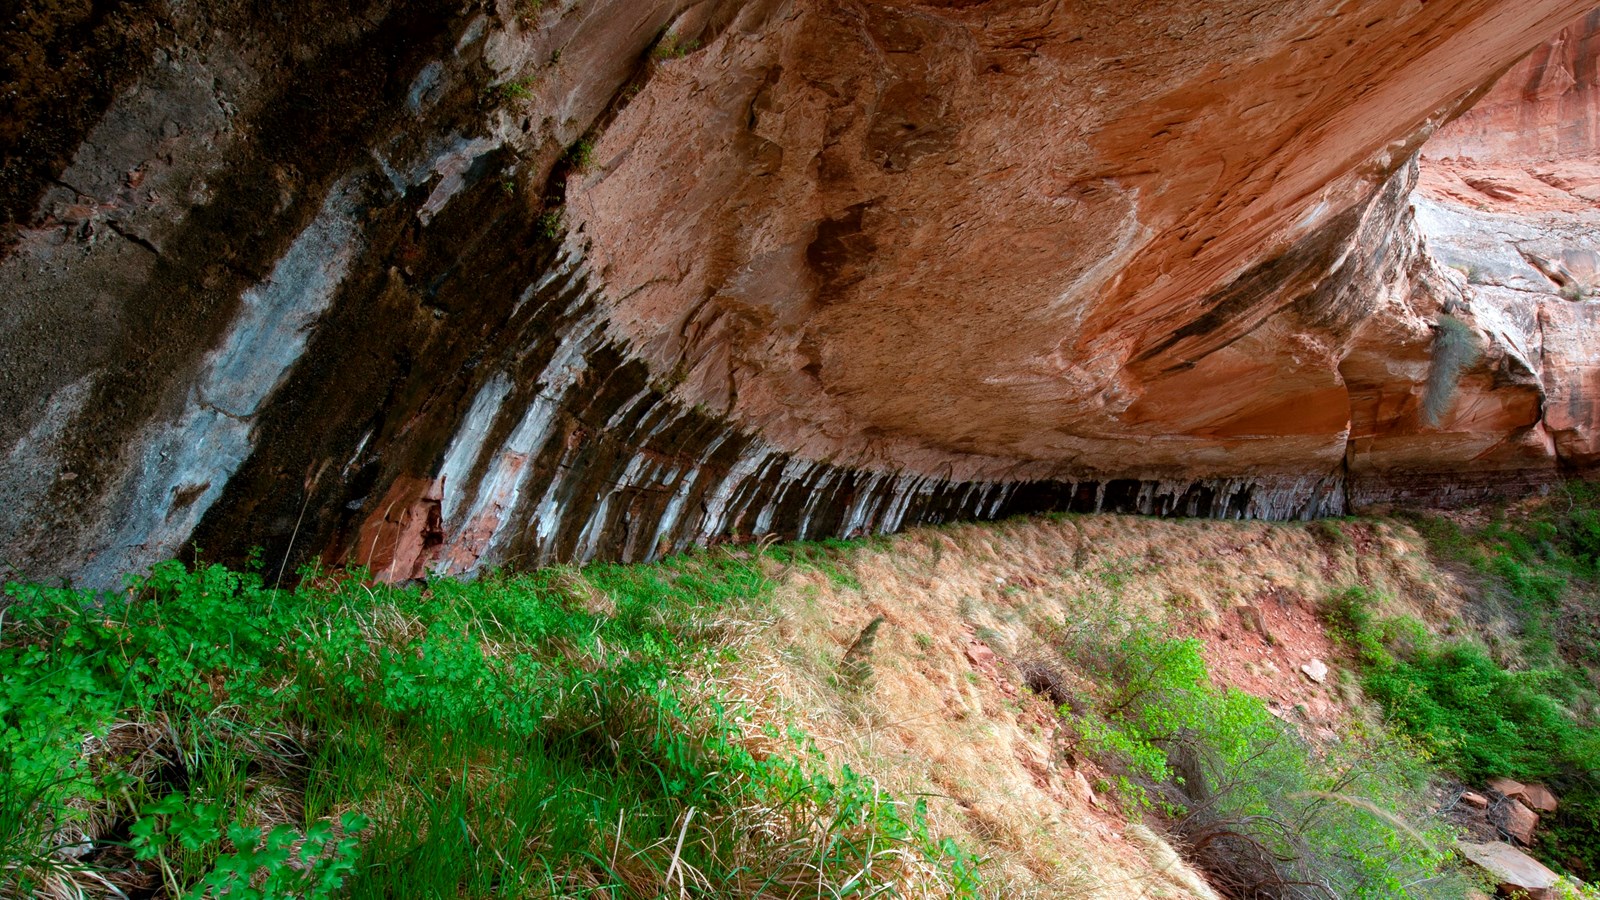 Streaks of water seep from a sandstone alcove onto lush greenery